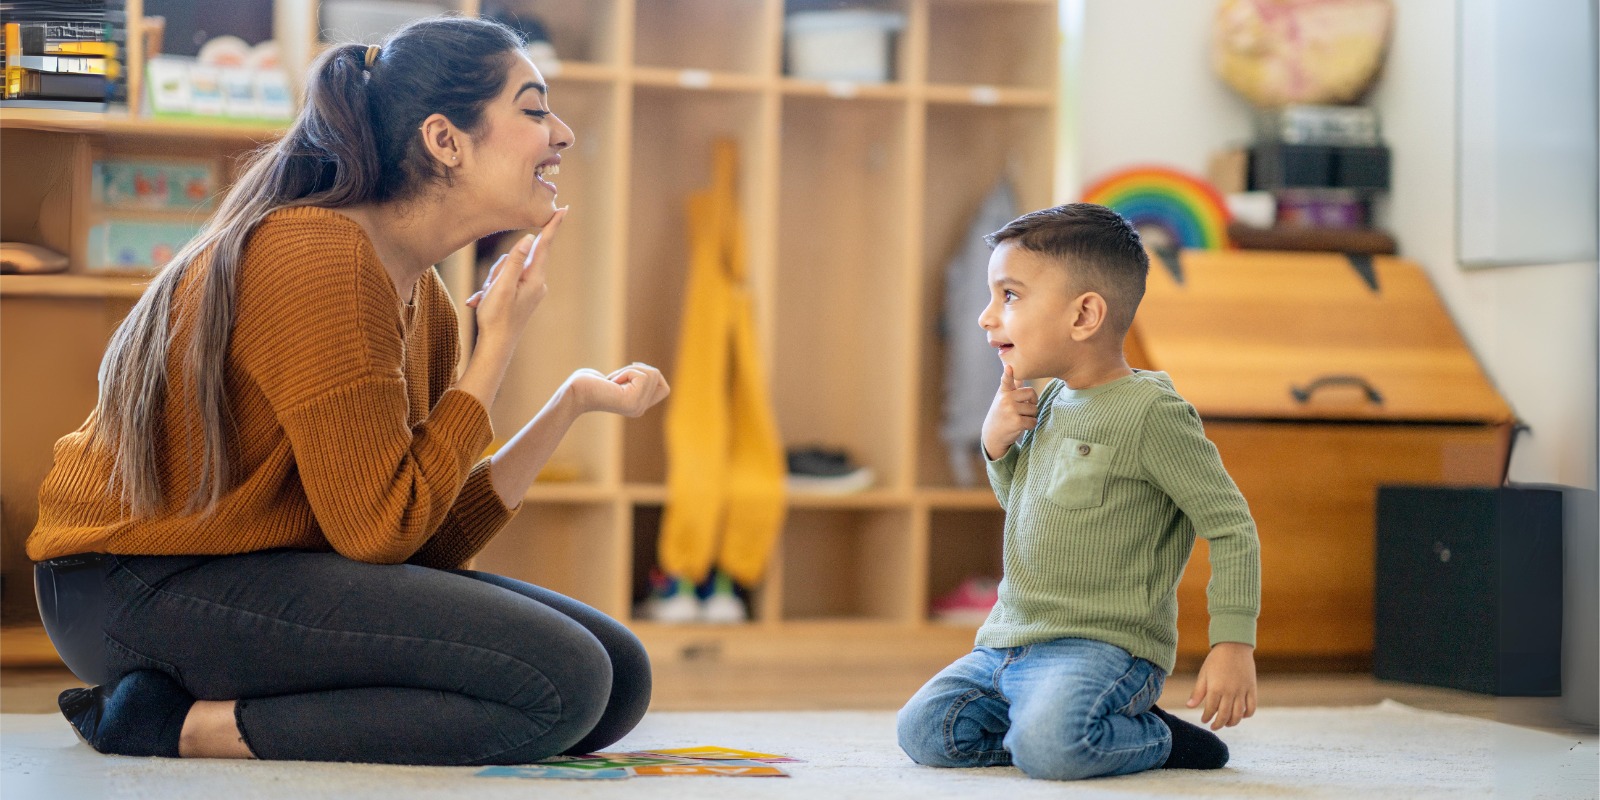 During a speech therapy session, a child is actively participating in engaging activities under the guidance of a speech therapist.